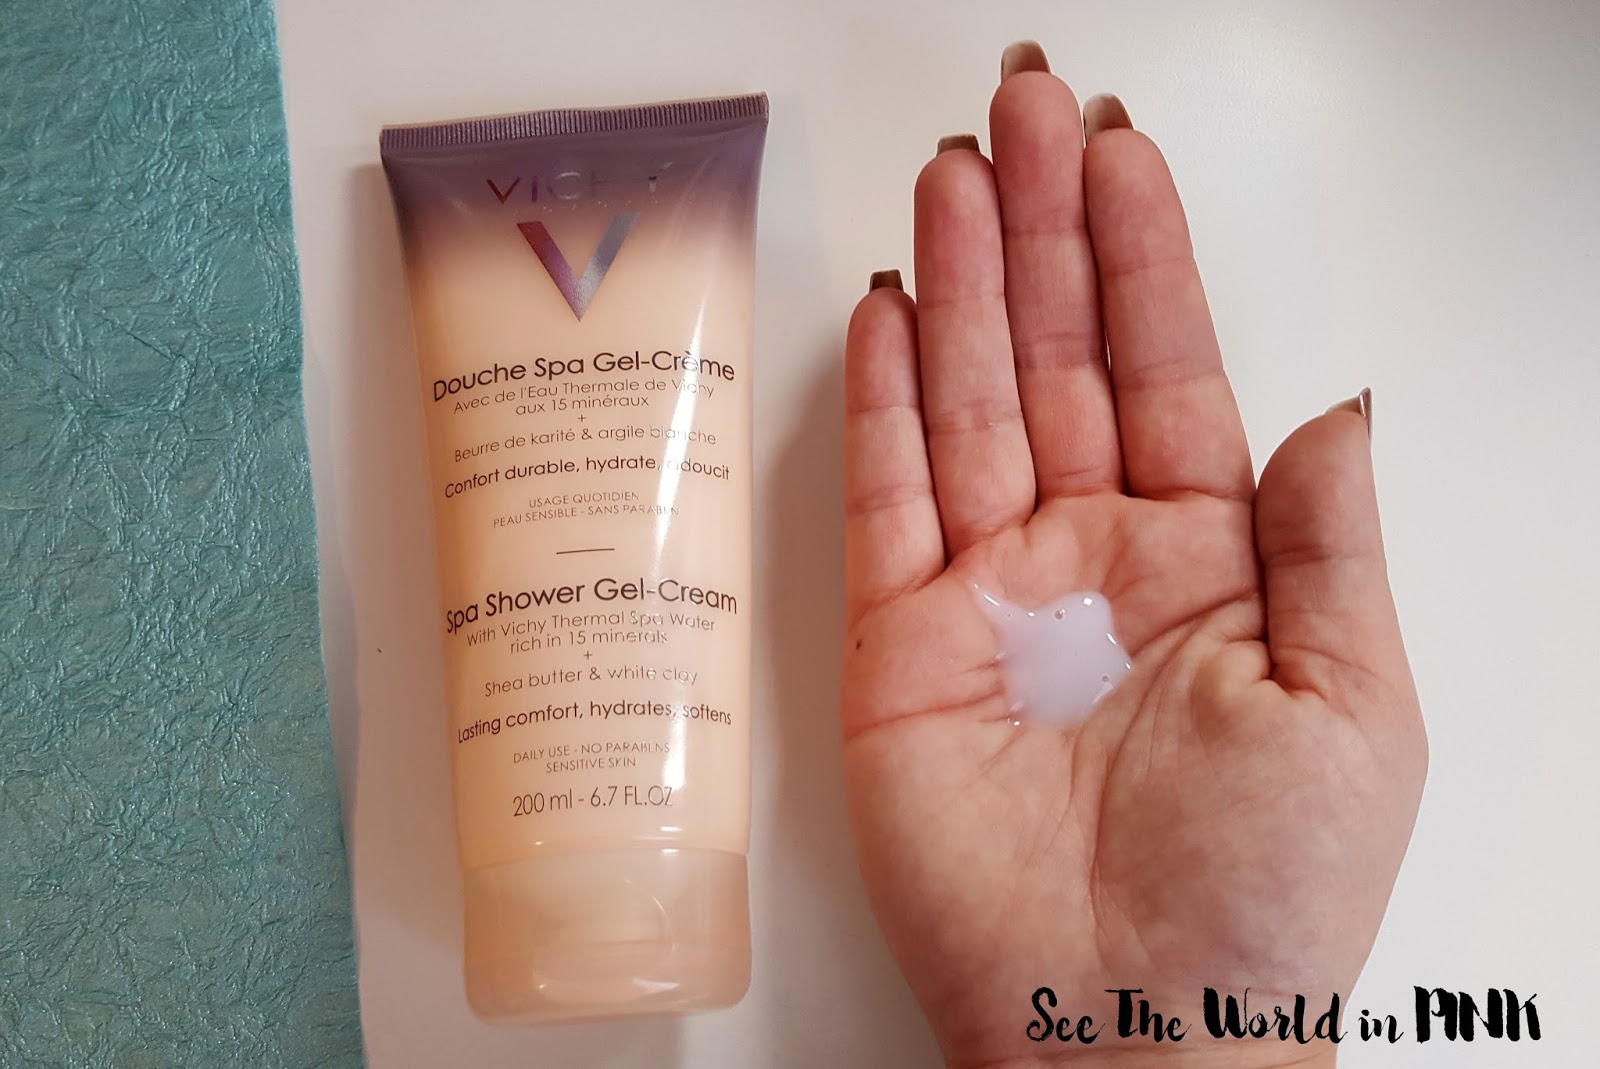 Skincare Sunday - Vichy Ideal Body Spa Gel-Cream and Gel-Oil Review